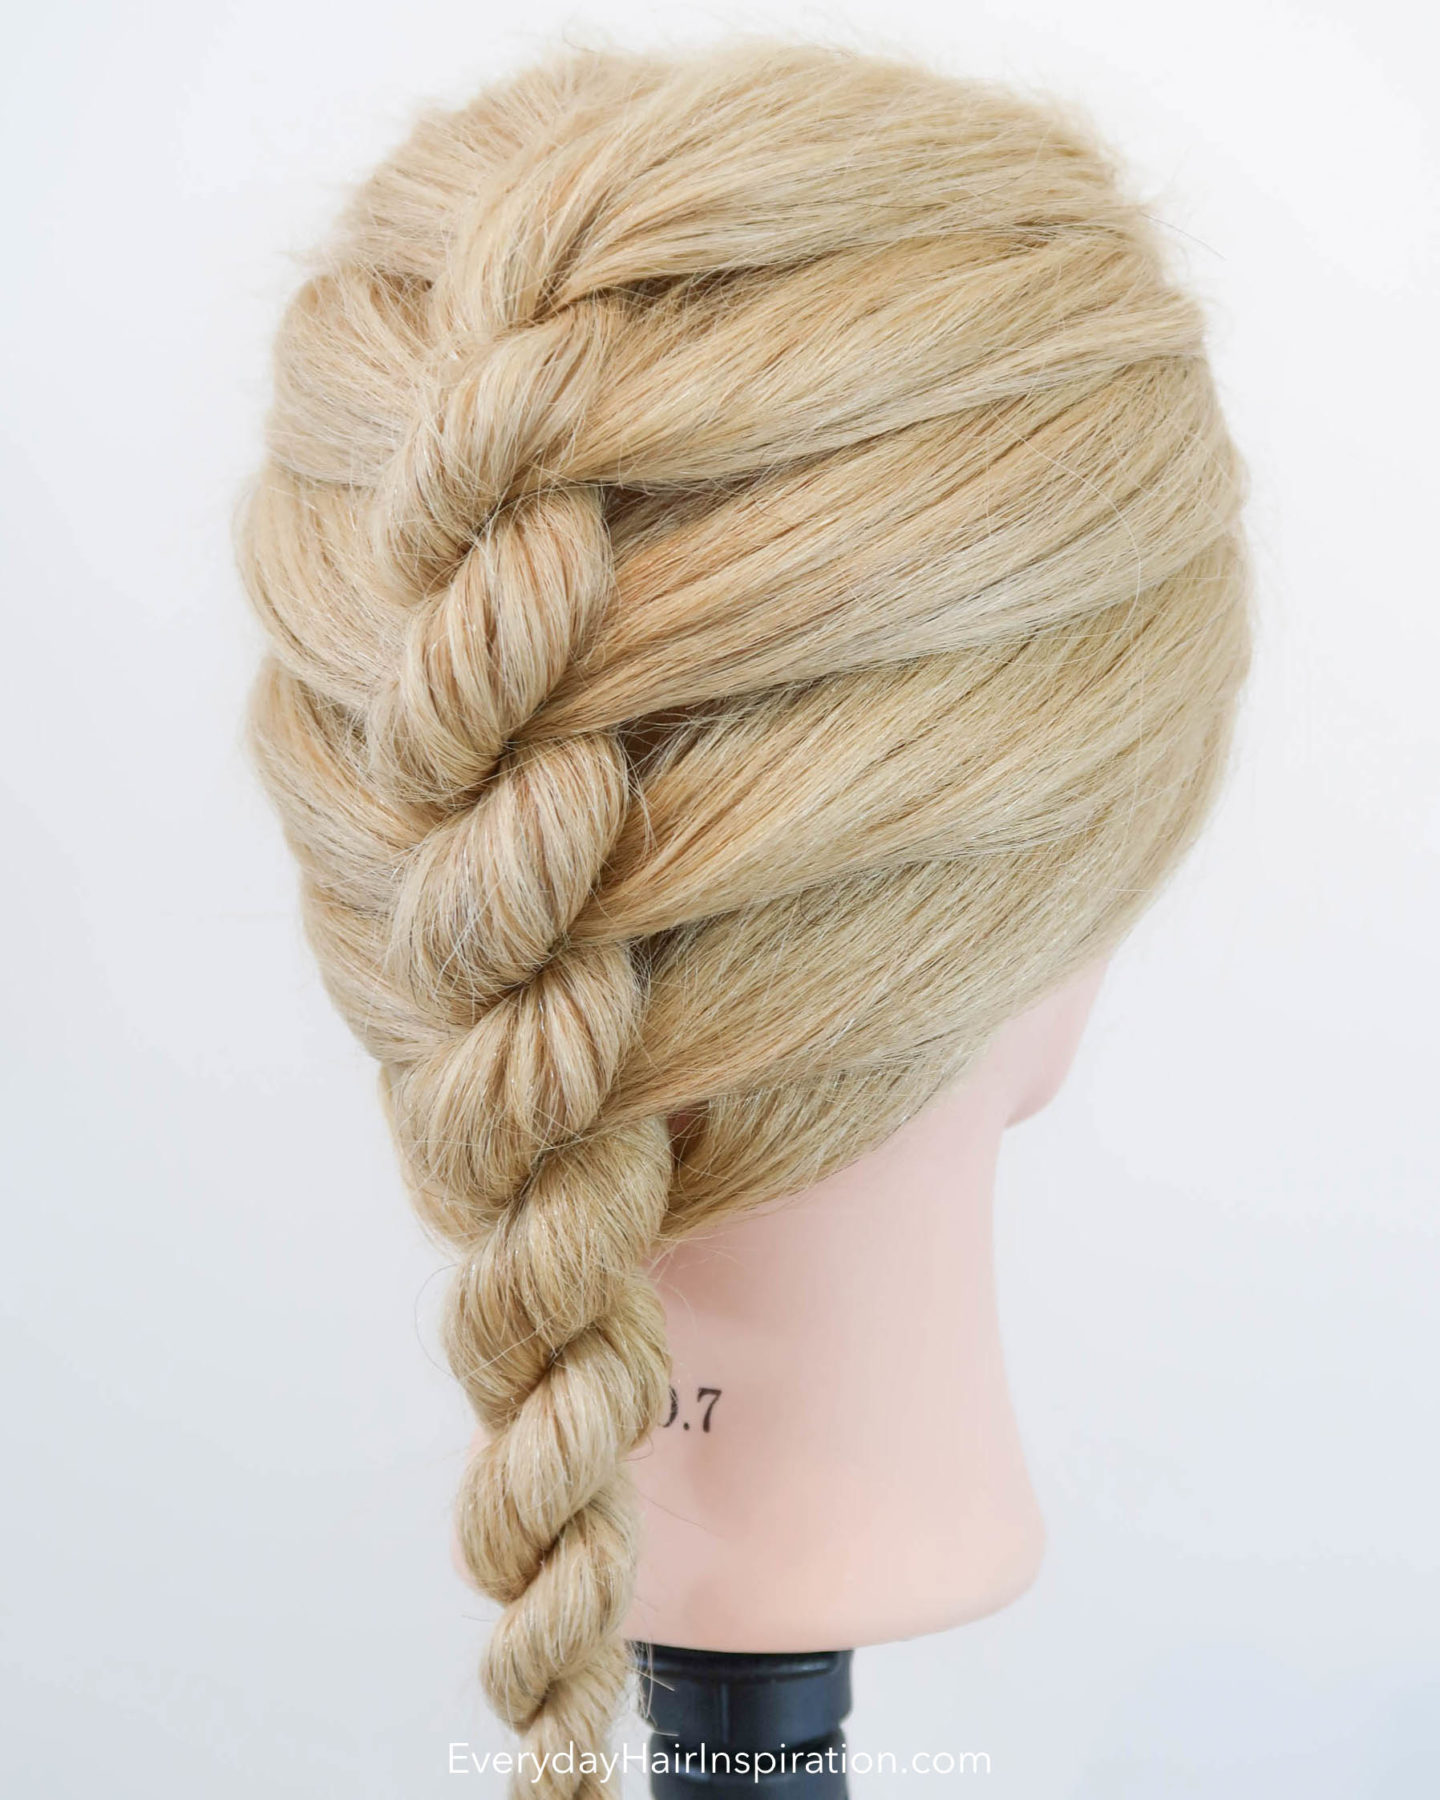 Blonde hairdresser doll with a single french rope braid in the hair - looking at the braid from a side angle.